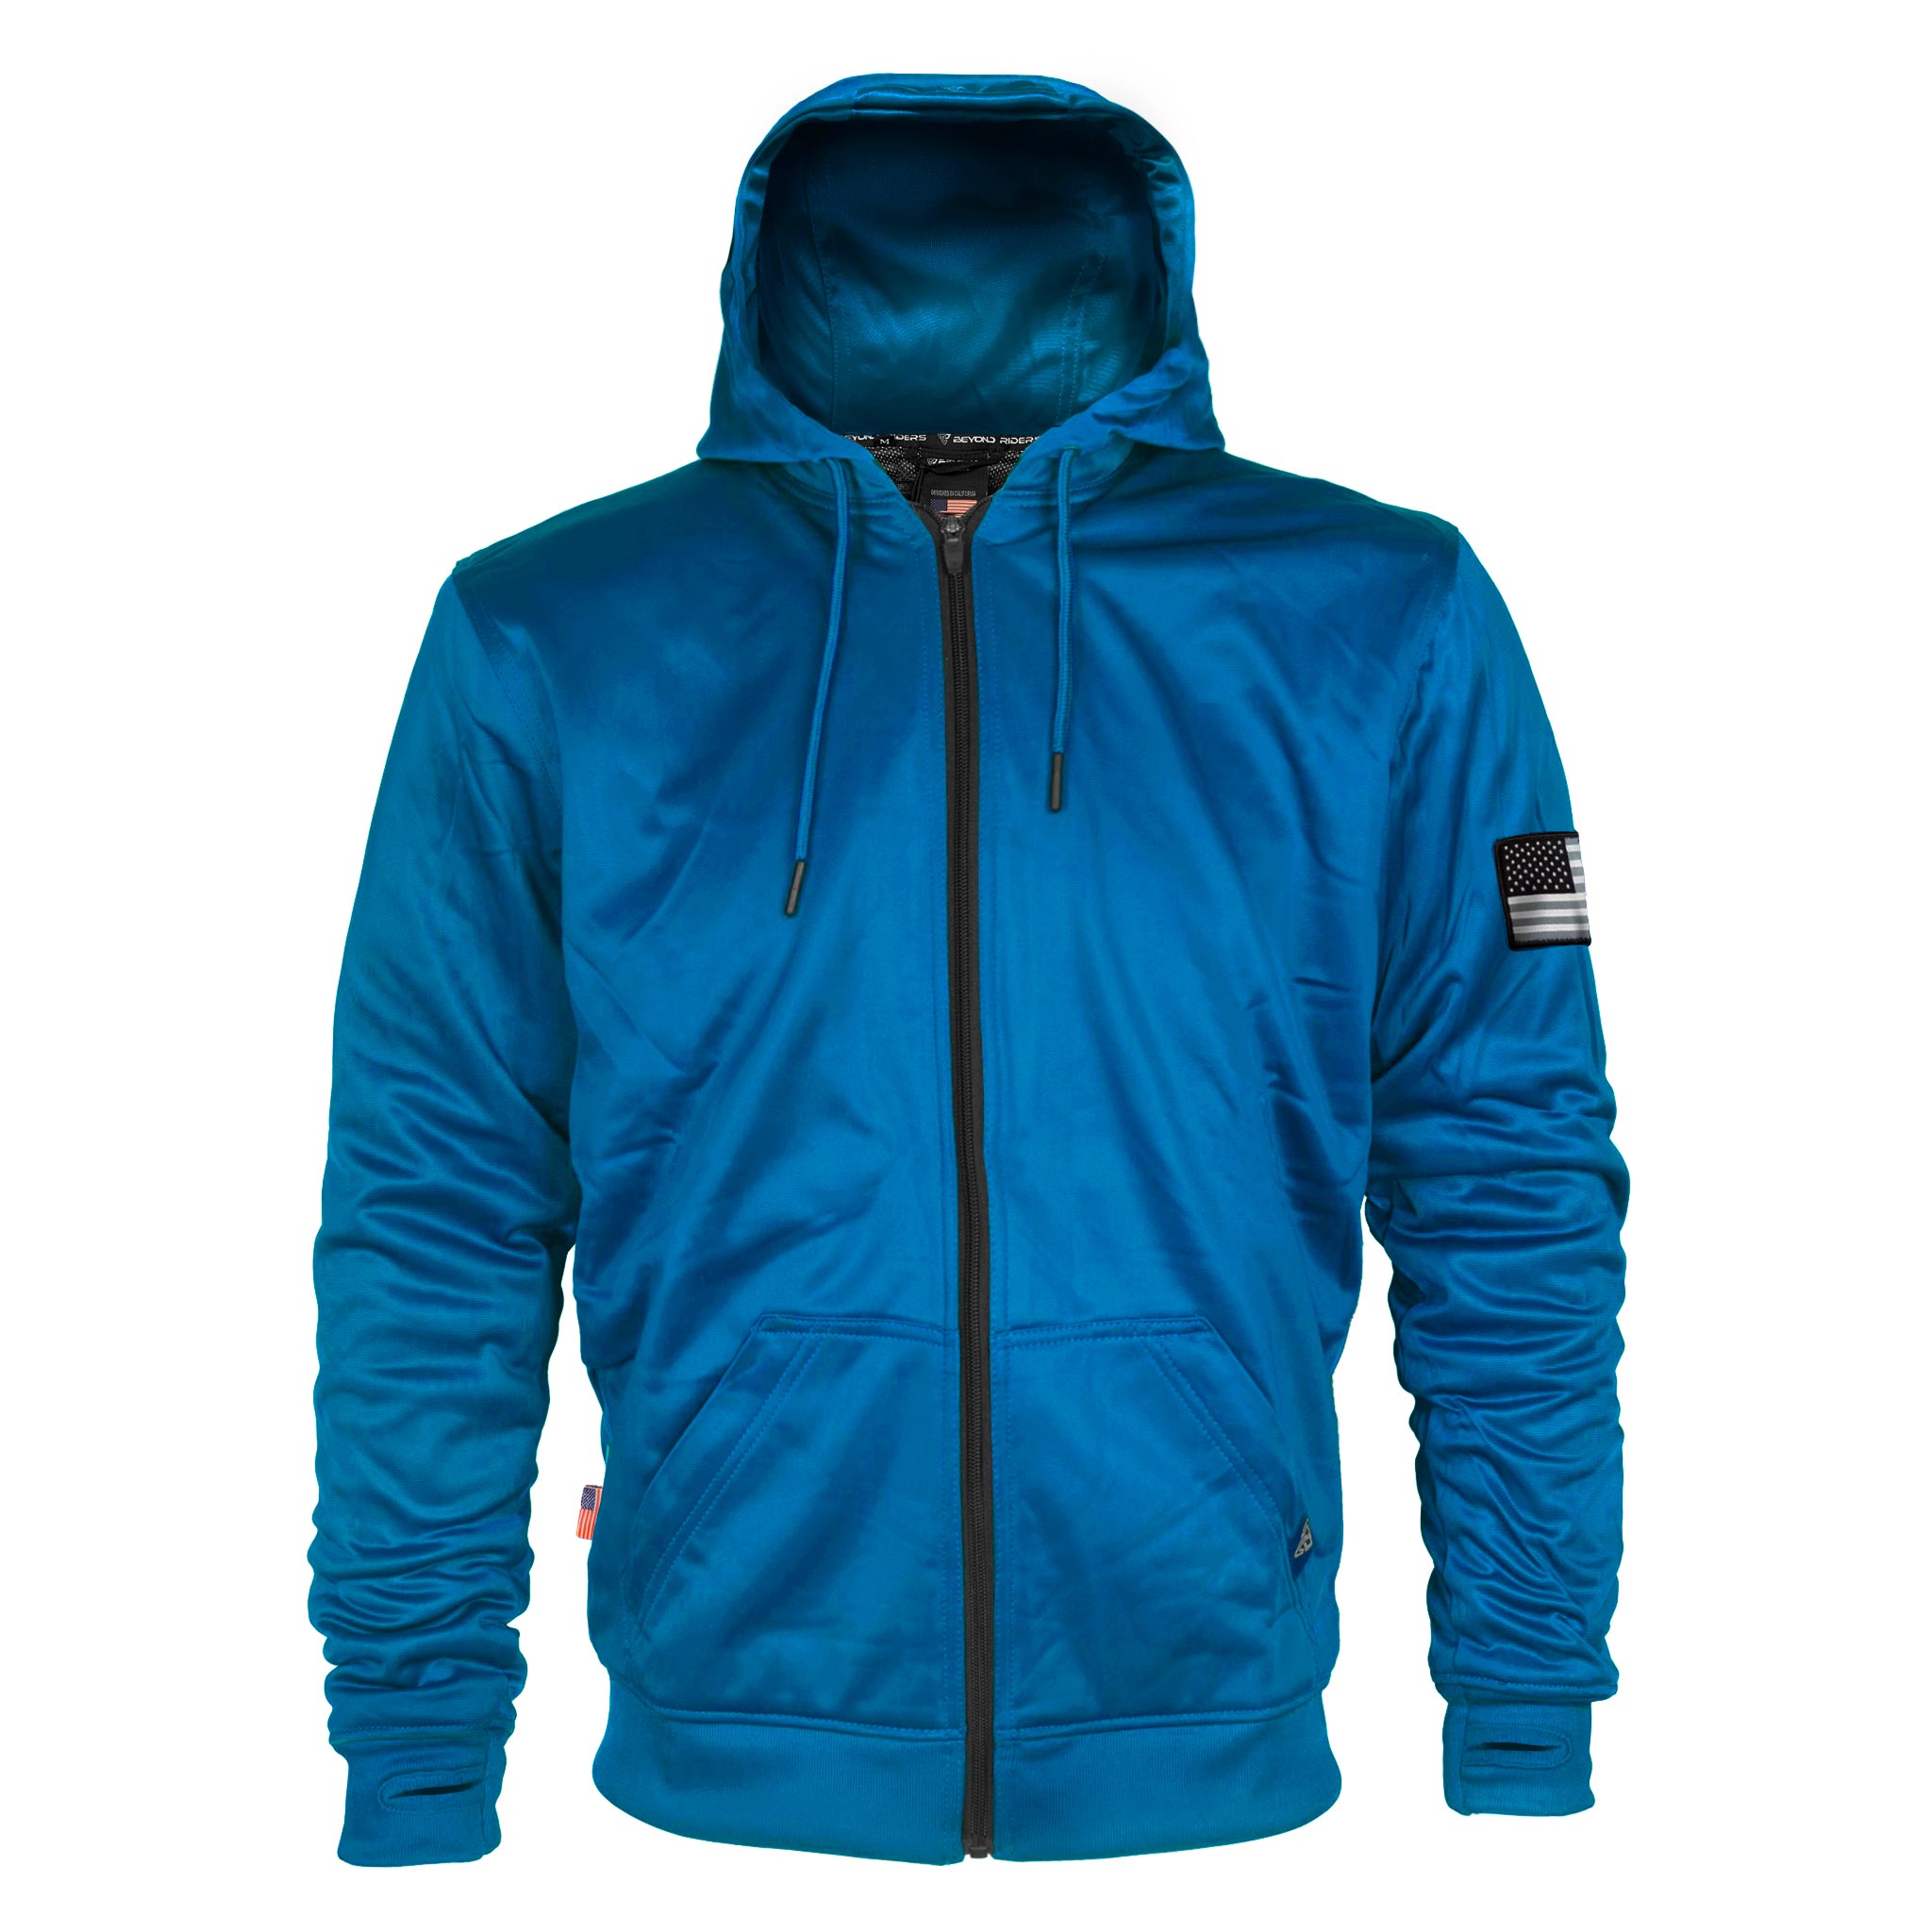 Teal Solid Ultra Protective Hoodie